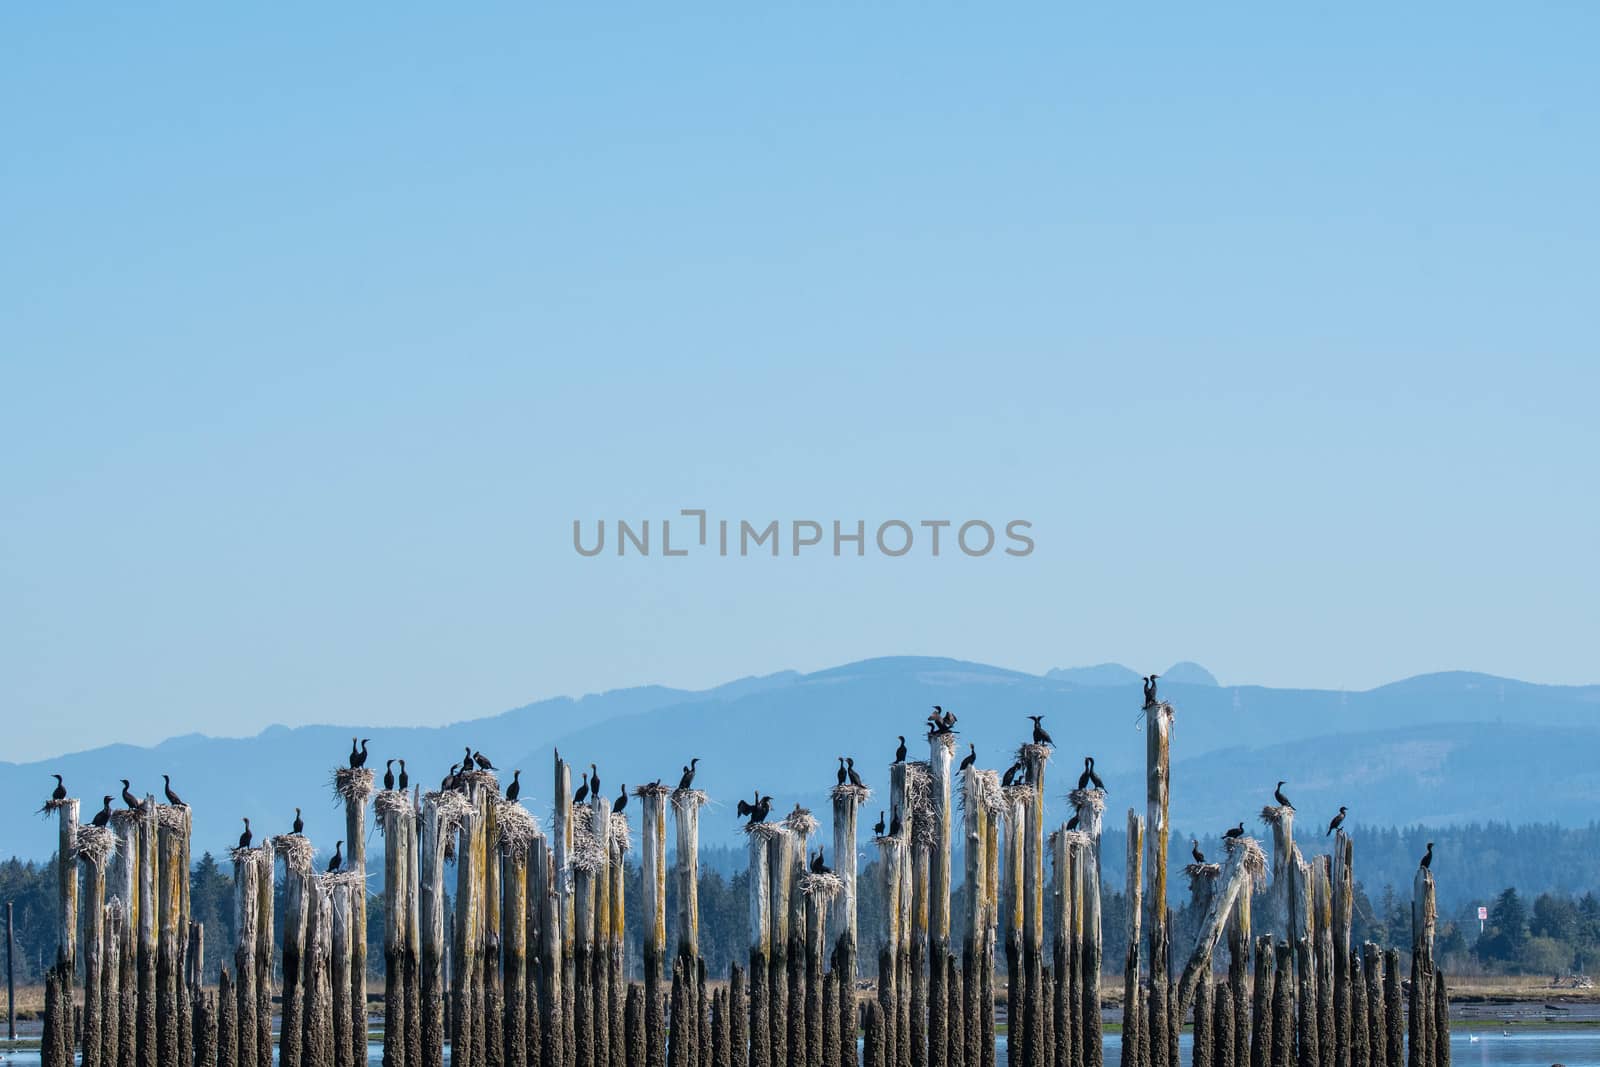 Cormorants on Pilings by cestes001